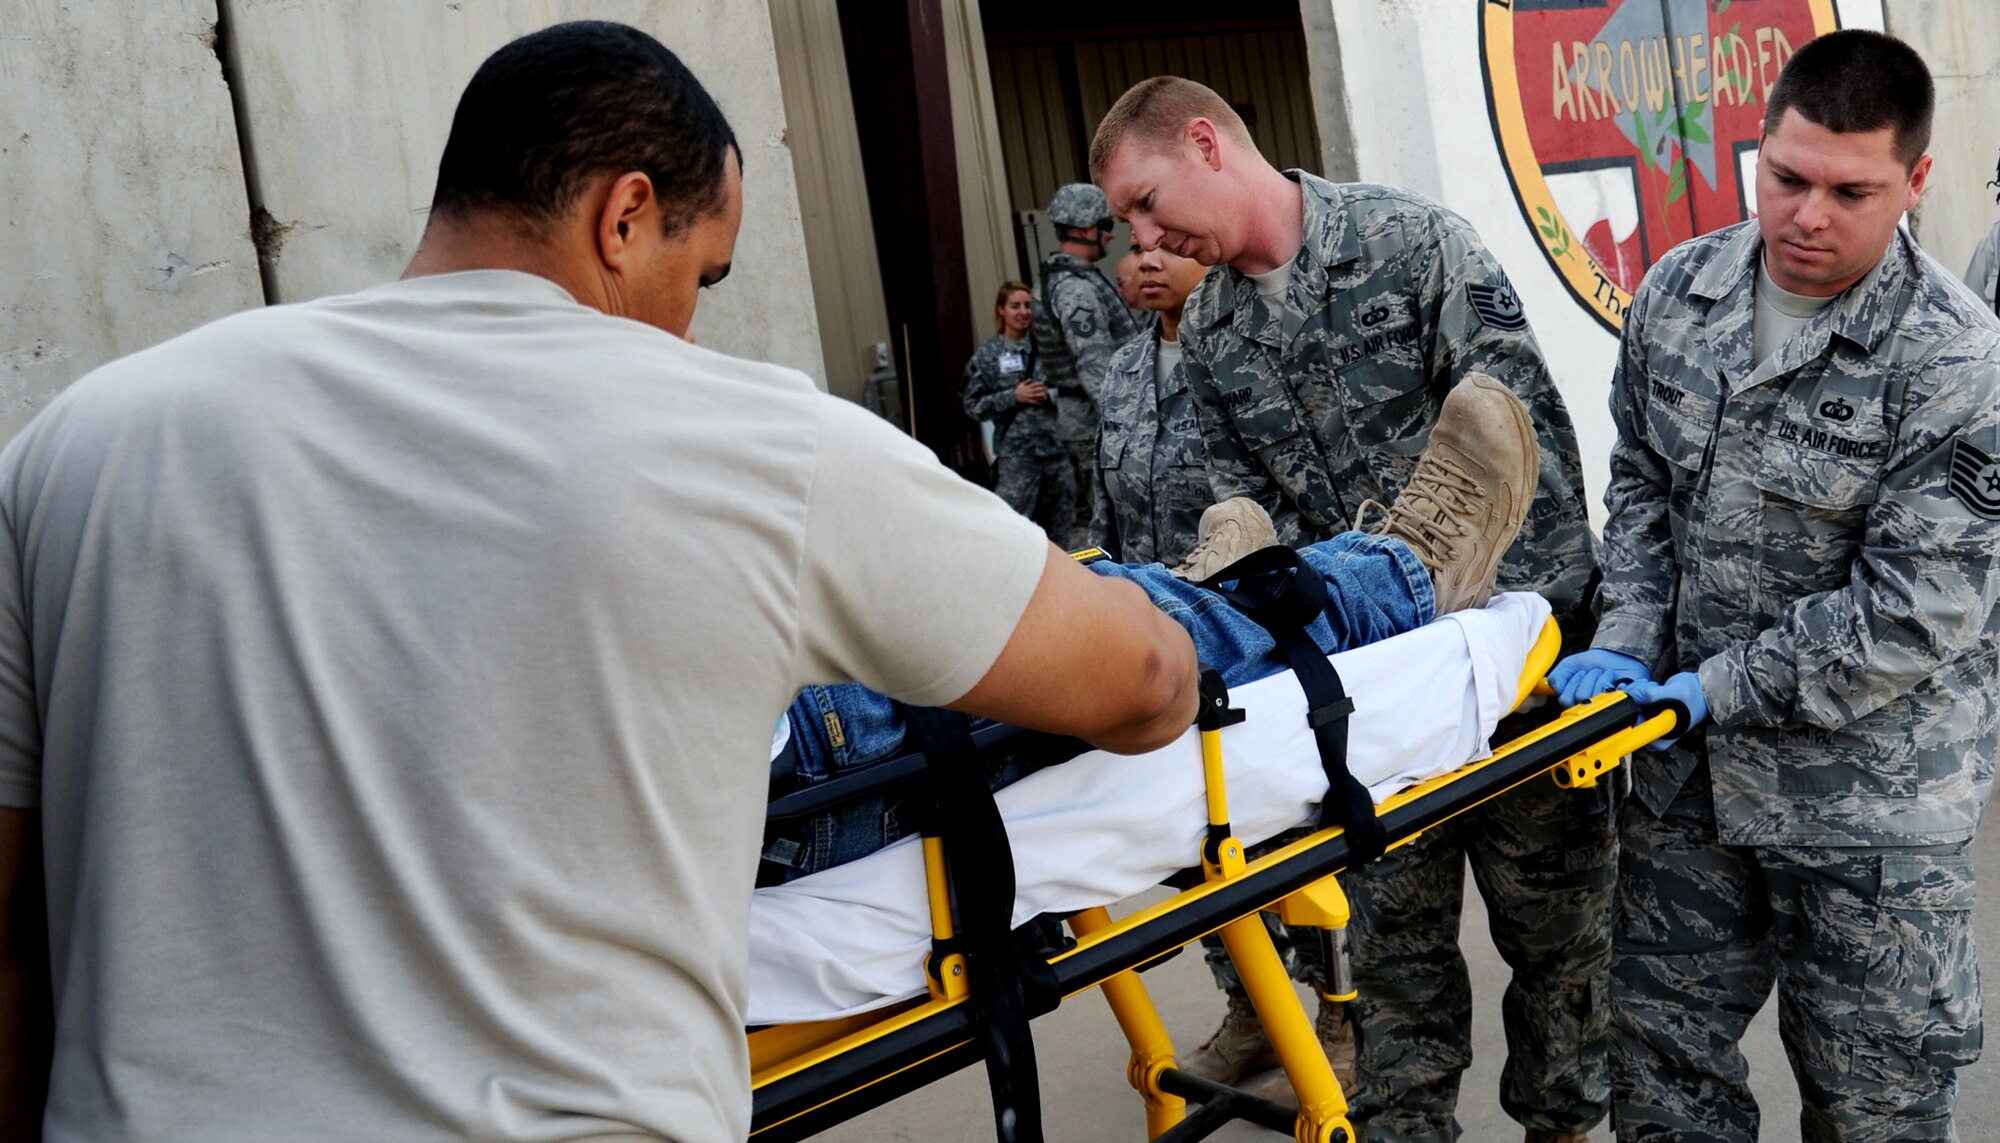 JOINT BASE BALAD, Iraq -- Tech. Sgts. Brandon Sharp and Jeremy Trout, hospital volunteers from the 332nd Expeditionary Operations Support Squadron, unload a patient from an ambulance at the Air Force Theater Hospital Nov. 3, 2009. Hospital volunteers spend their free time assisting hospital personnel in a variety of ways, and are available in the event of a mass casualty. (U.S. Air Force photo/Senior Airman Christopher Hubenthal)